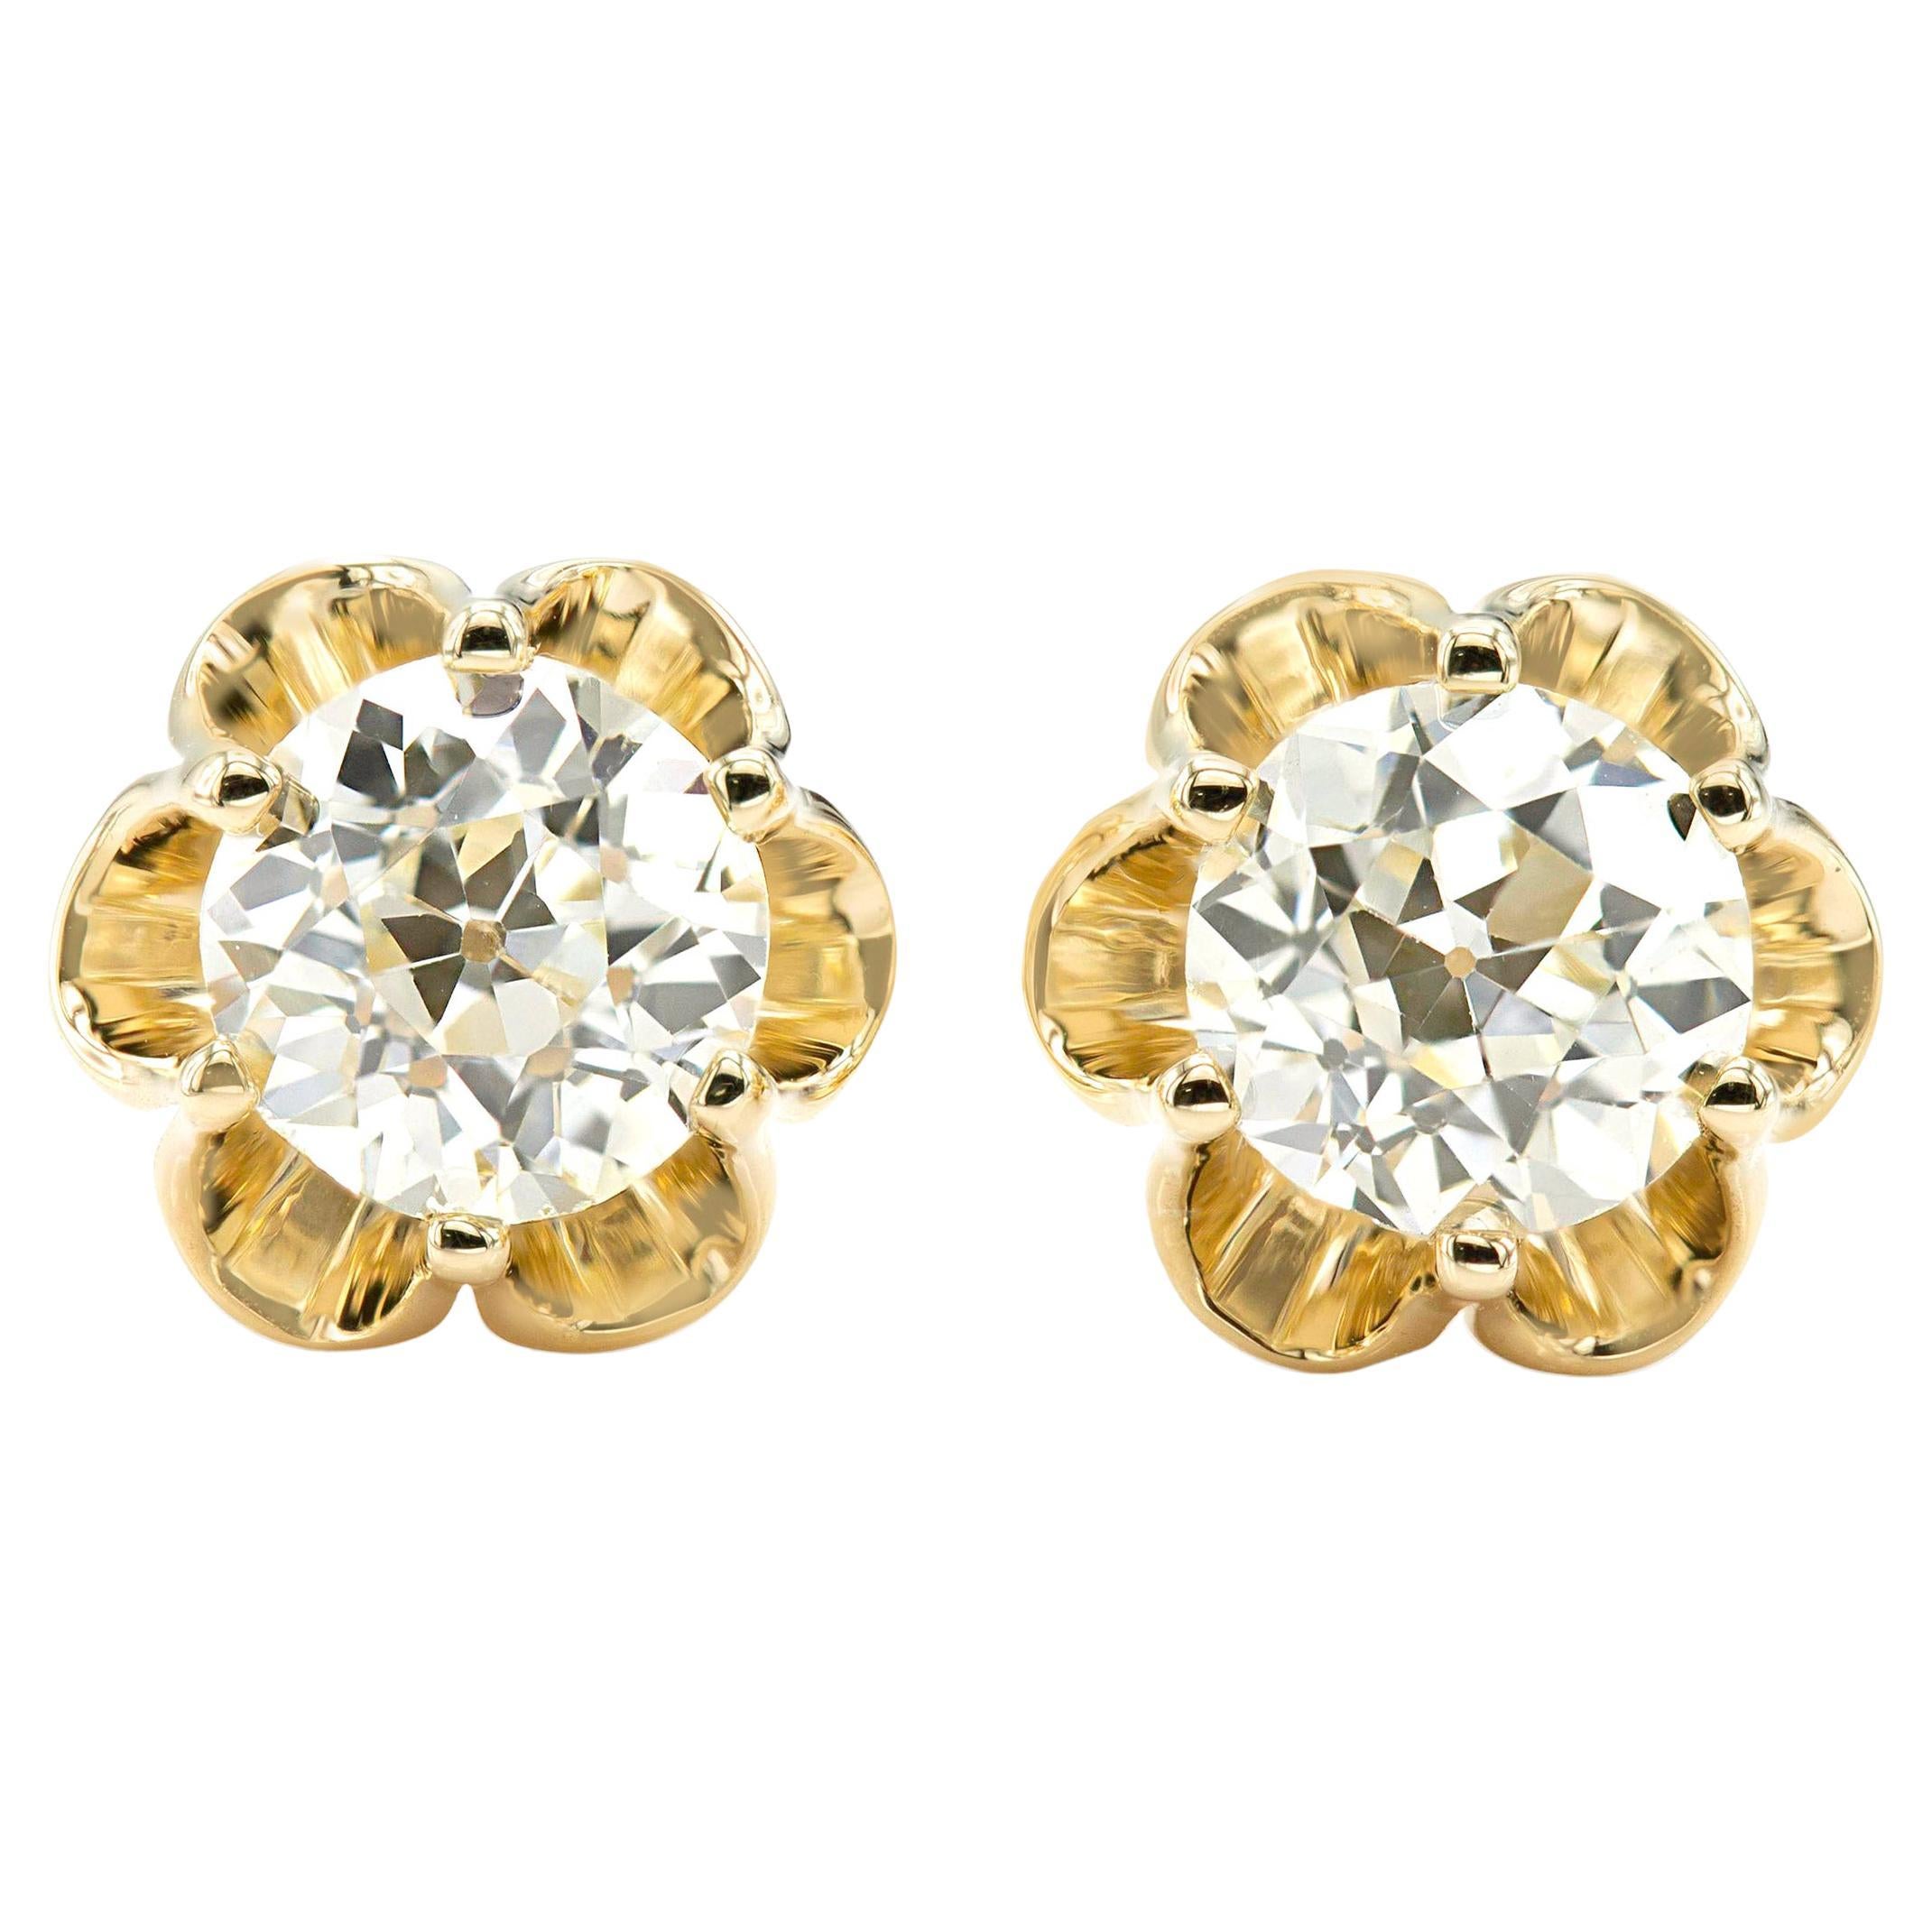 GIA Certified REV IVE 1.36 Ctw Old European Buttercup Diamond Studs For Sale